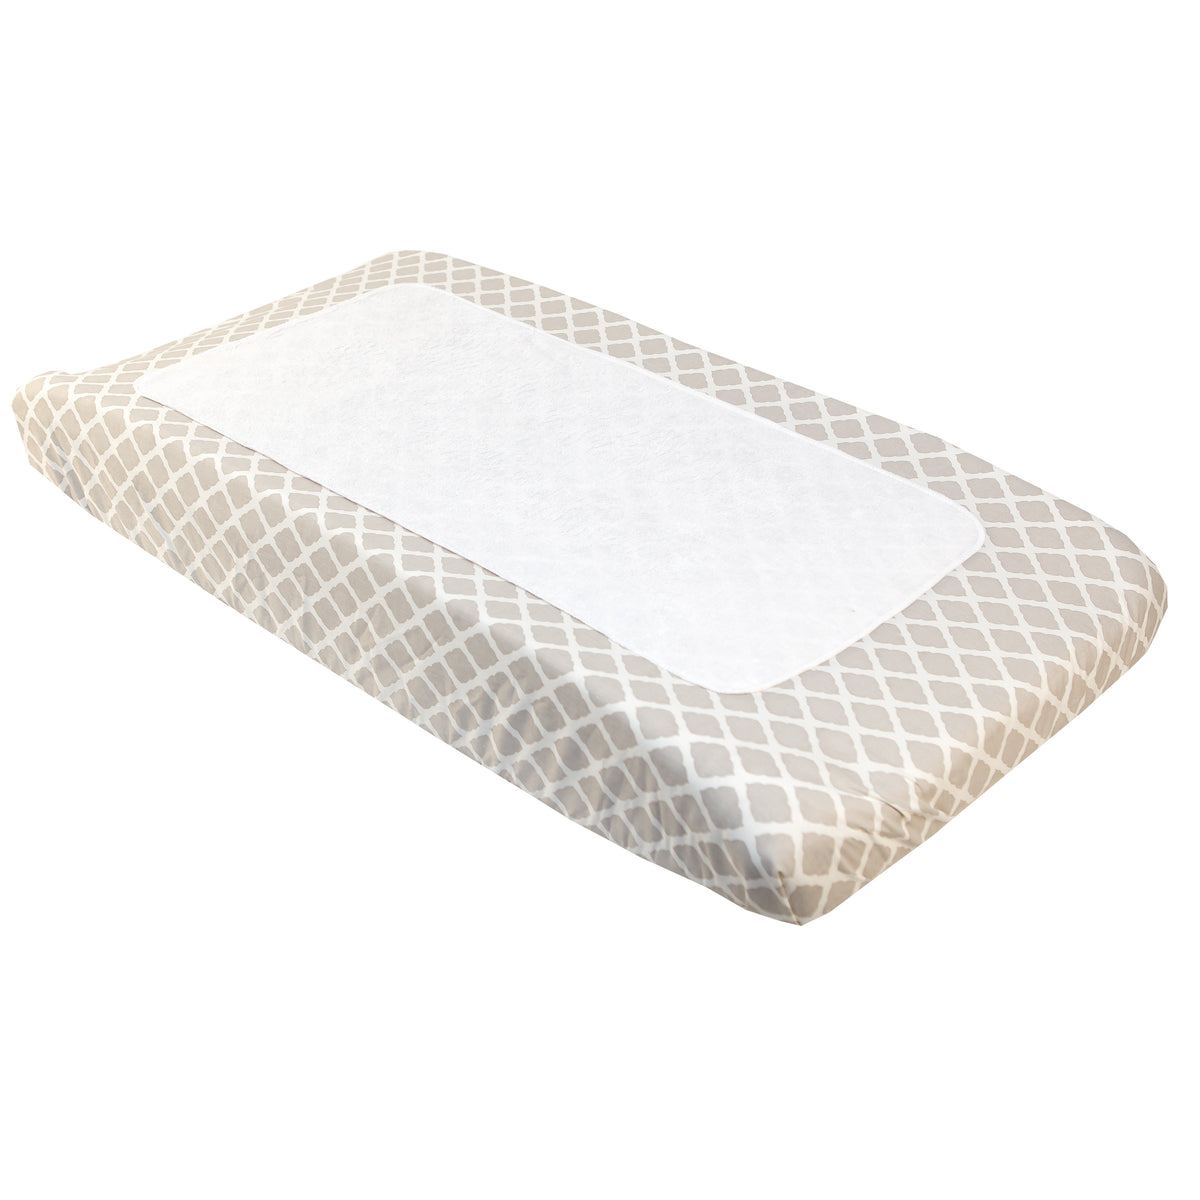 Ben &amp; Noa | Percale Changing Pad Sheet with Terry Insert